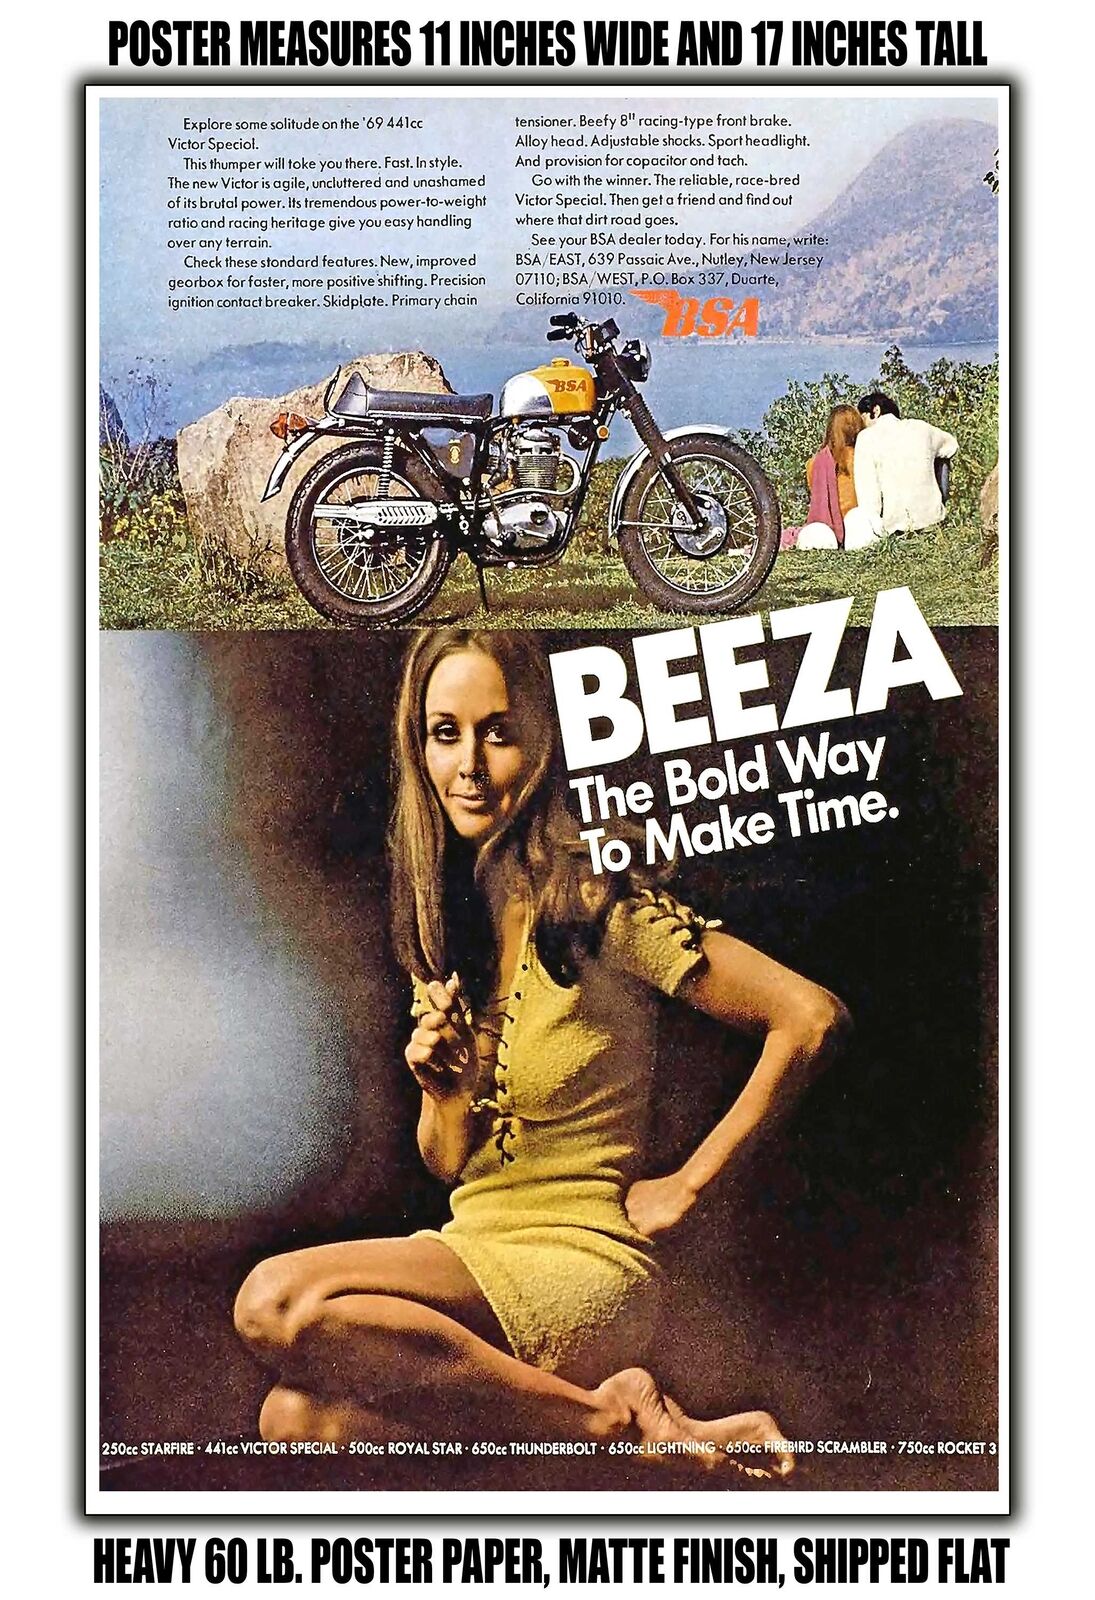 11x17 POSTER - 1969 BSA 441cc Victor Special Beeza the Bold Way to Make Time